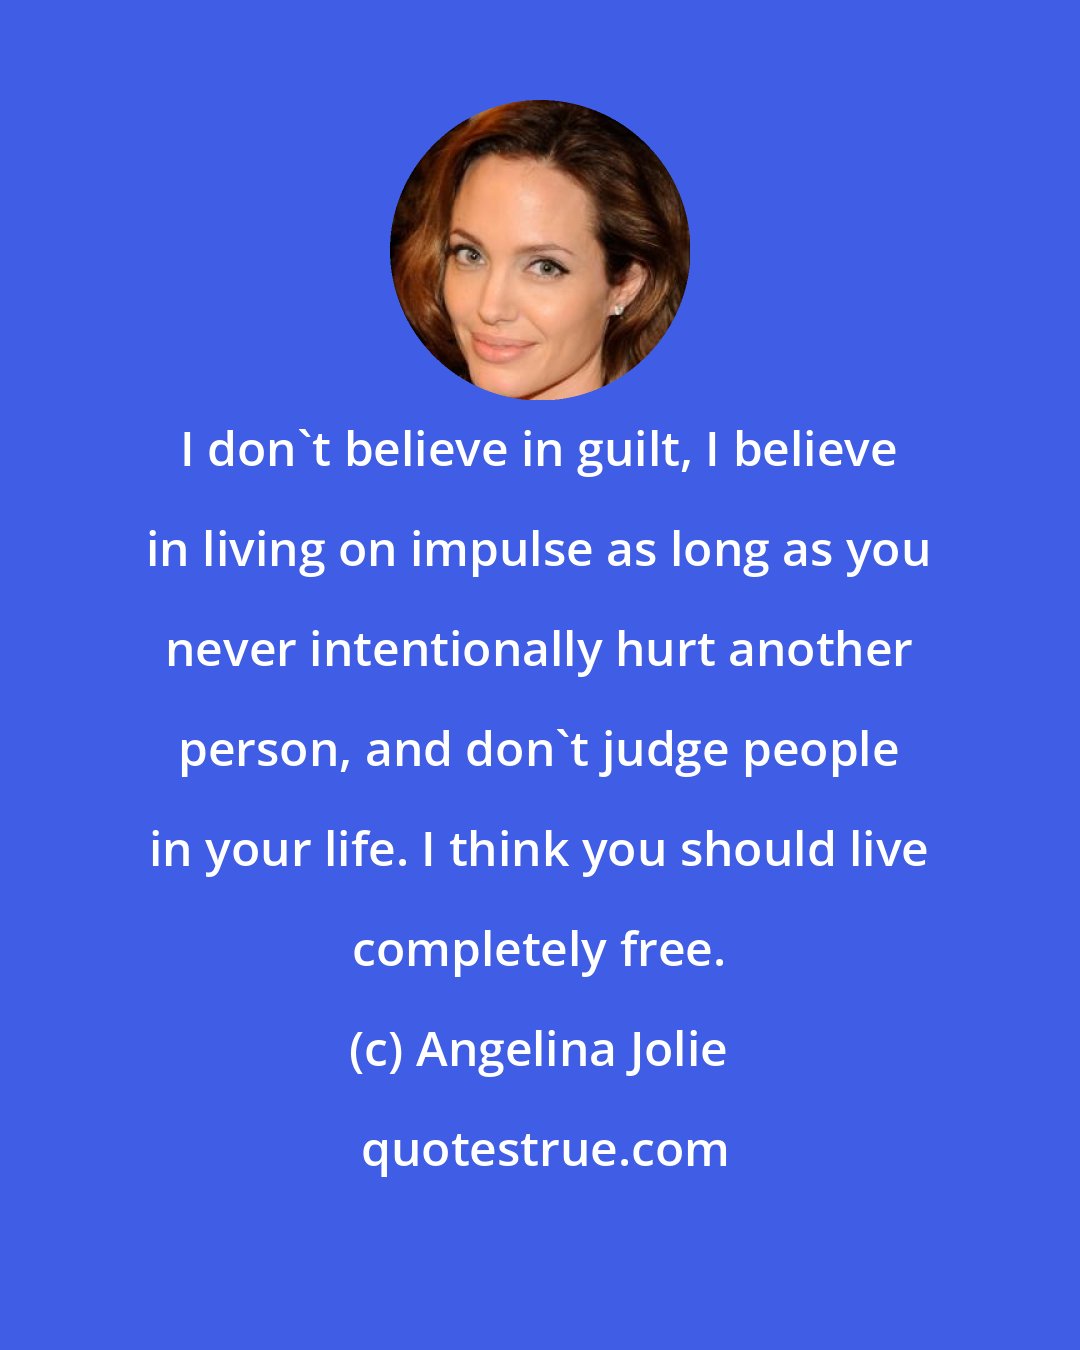 Angelina Jolie: I don't believe in guilt, I believe in living on impulse as long as you never intentionally hurt another person, and don't judge people in your life. I think you should live completely free.